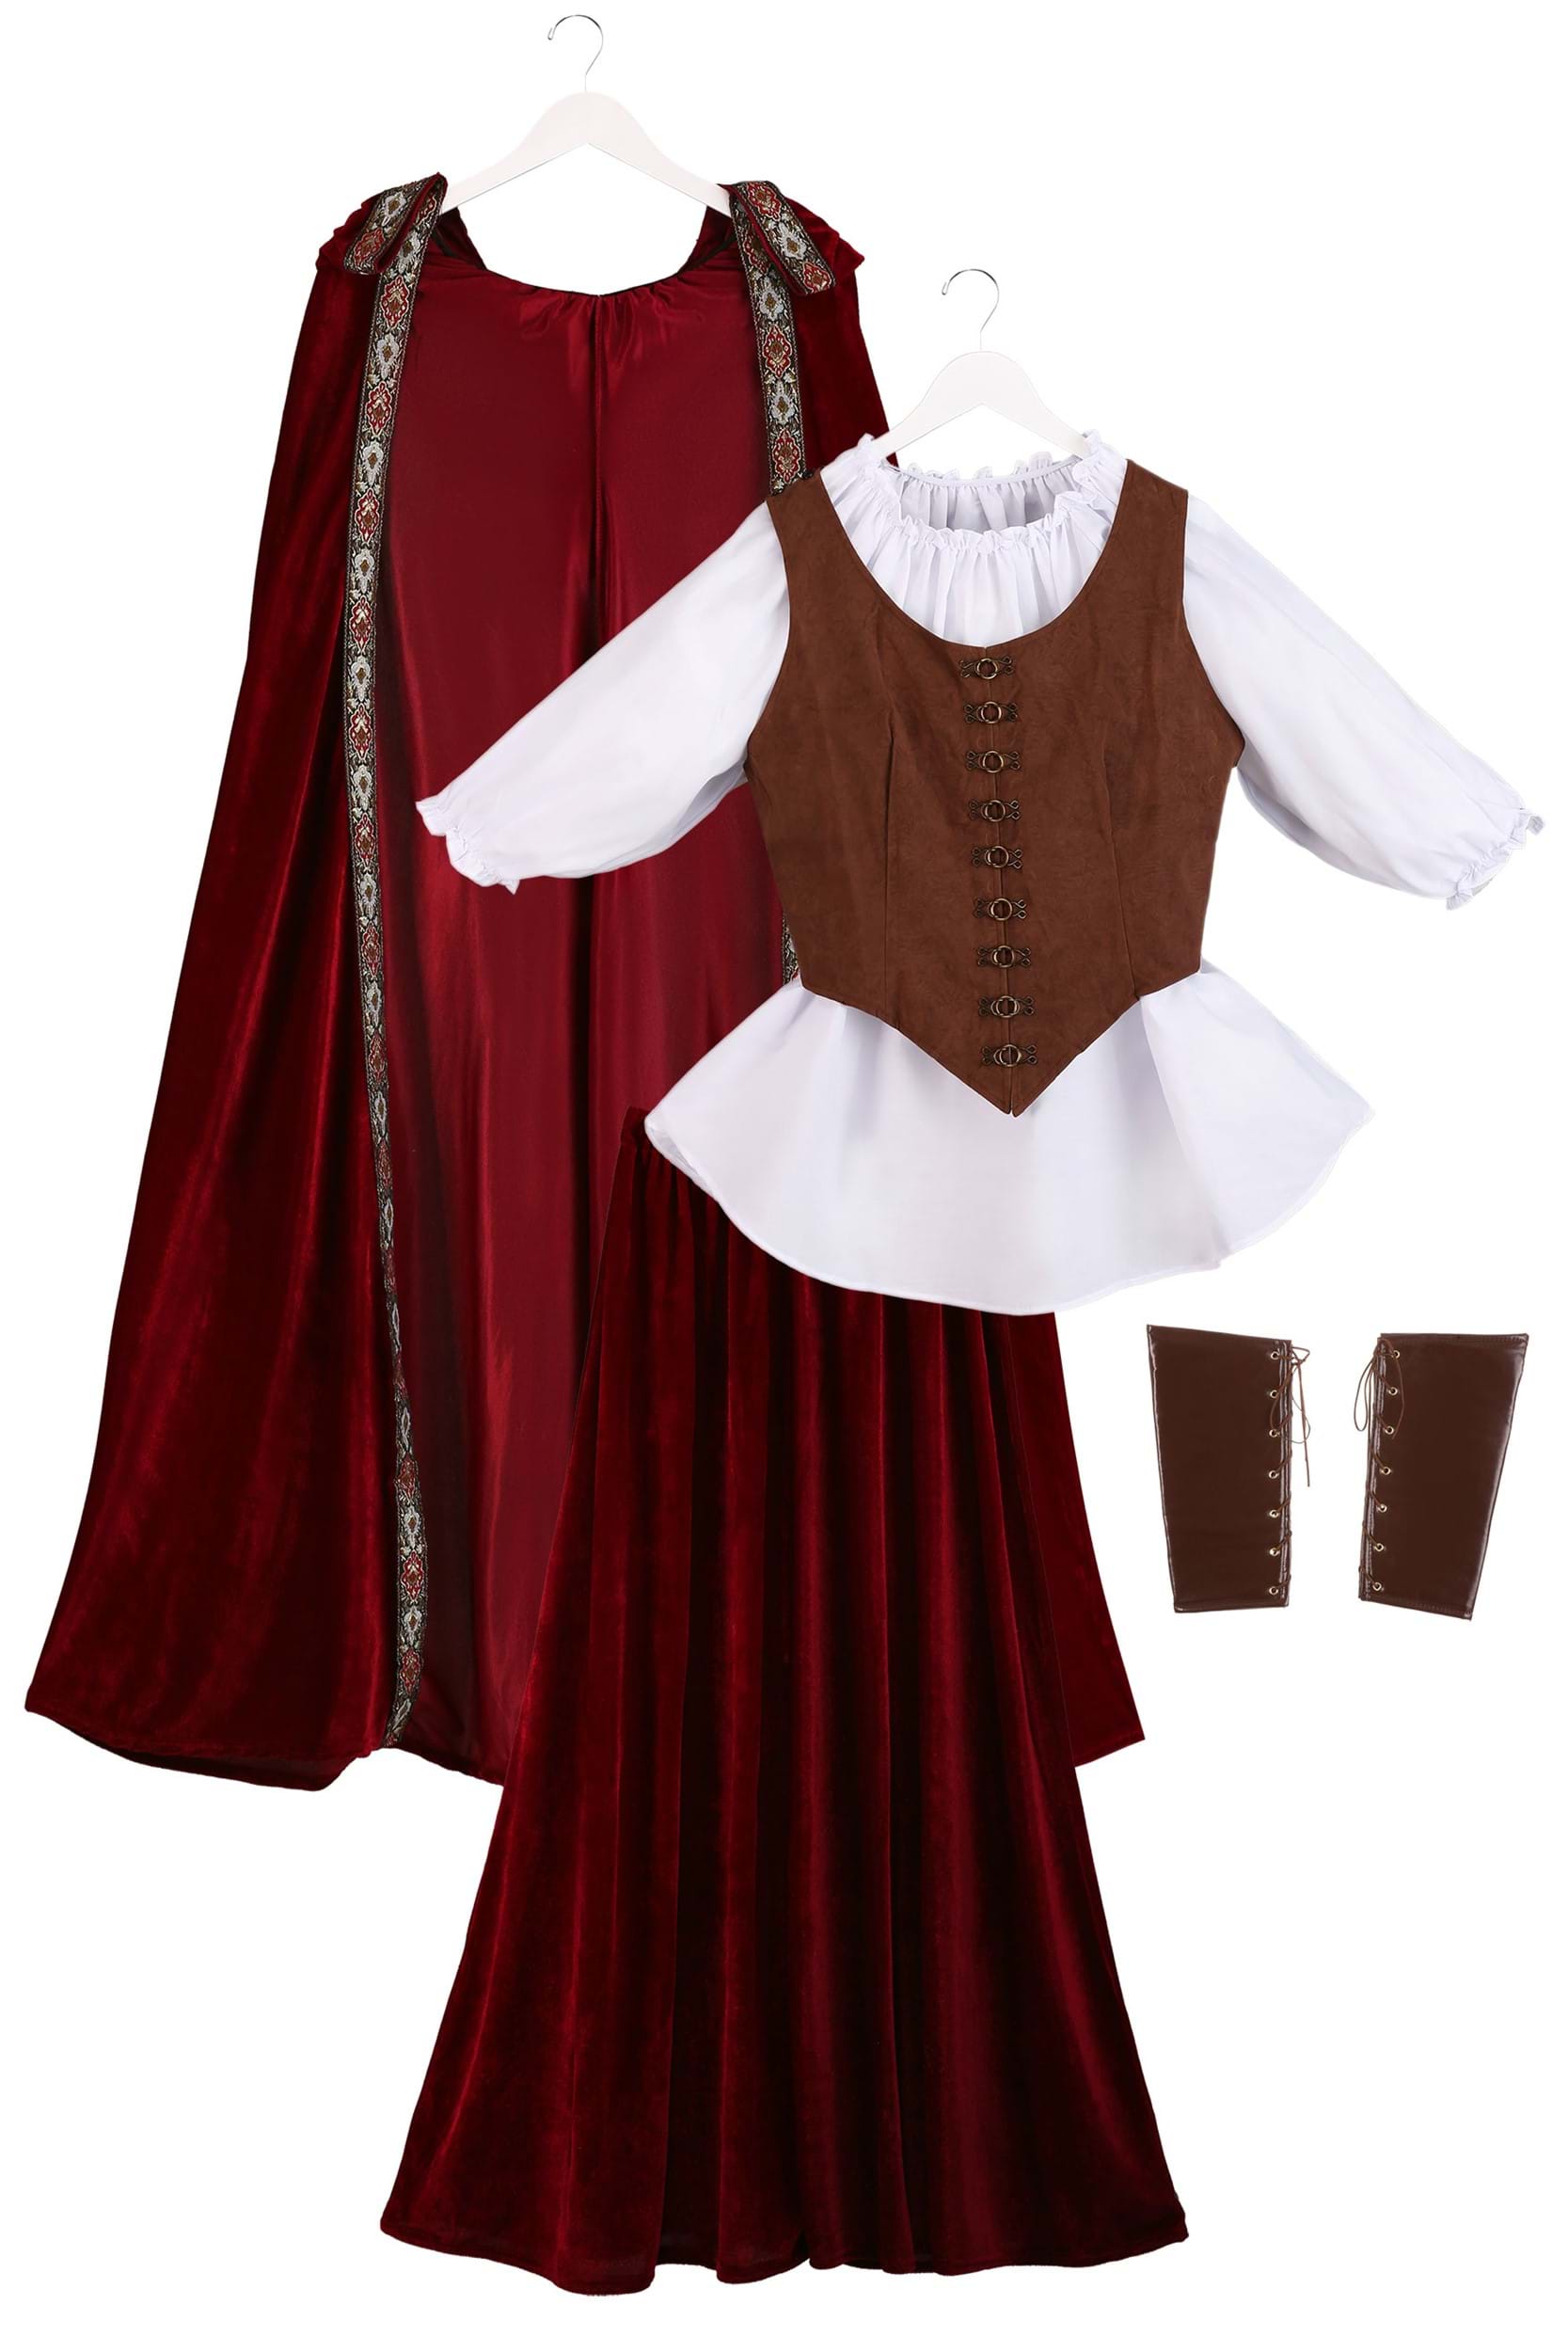 Deluxe Red Riding Hood Plus Size Fancy Dress Costume For Women , Exclusive